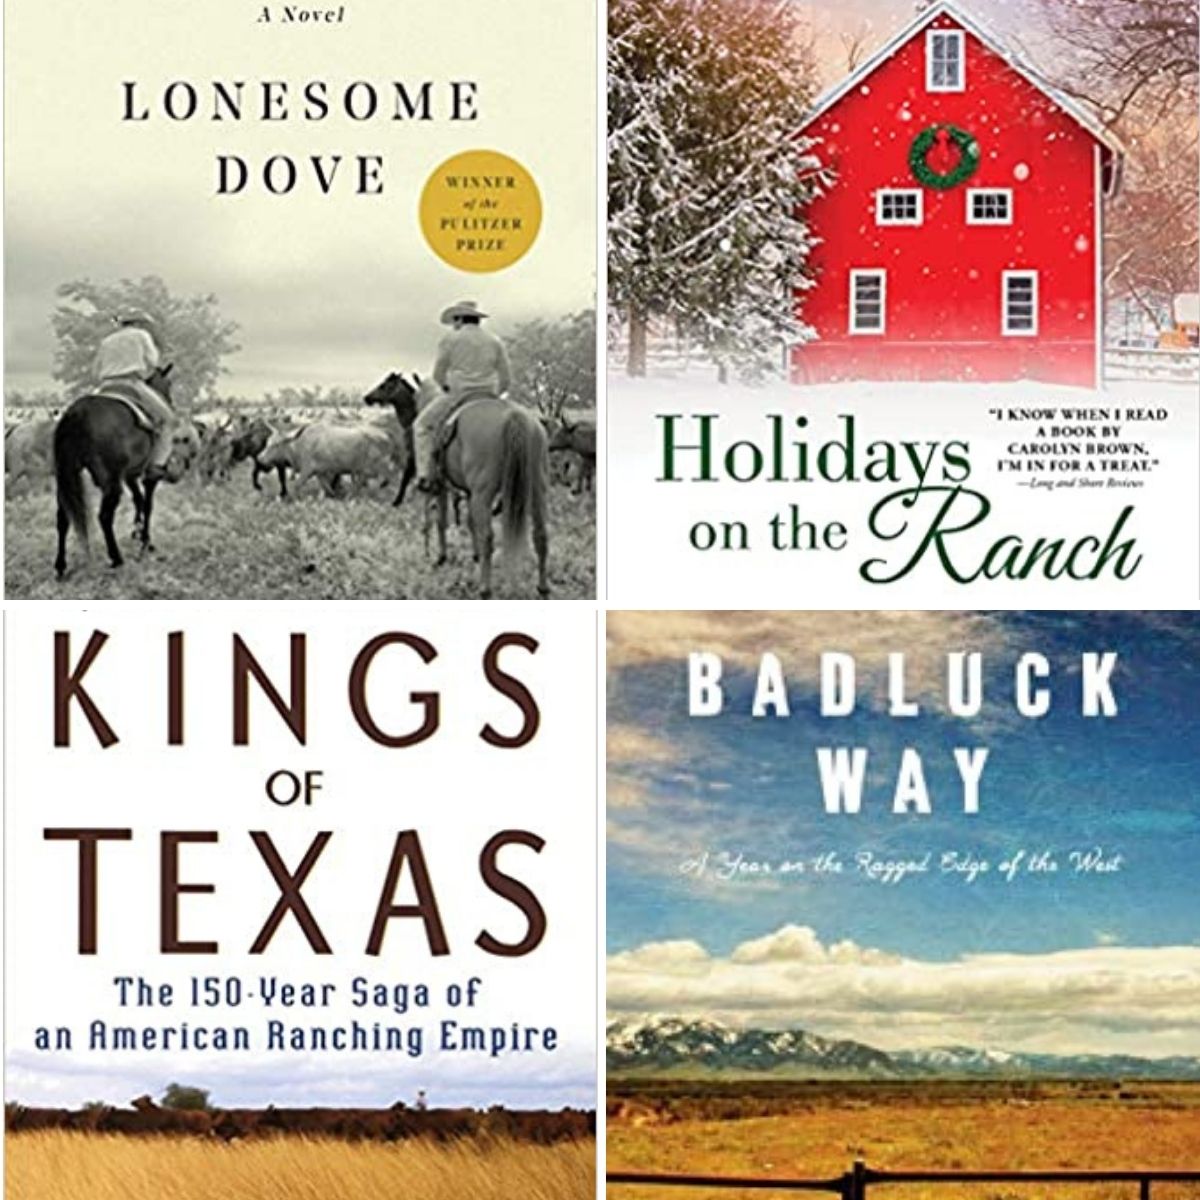 Collage of four book covers: Lonesome Dove, Kings of Texas, Badluck Way, and Holidays on the Ranch.